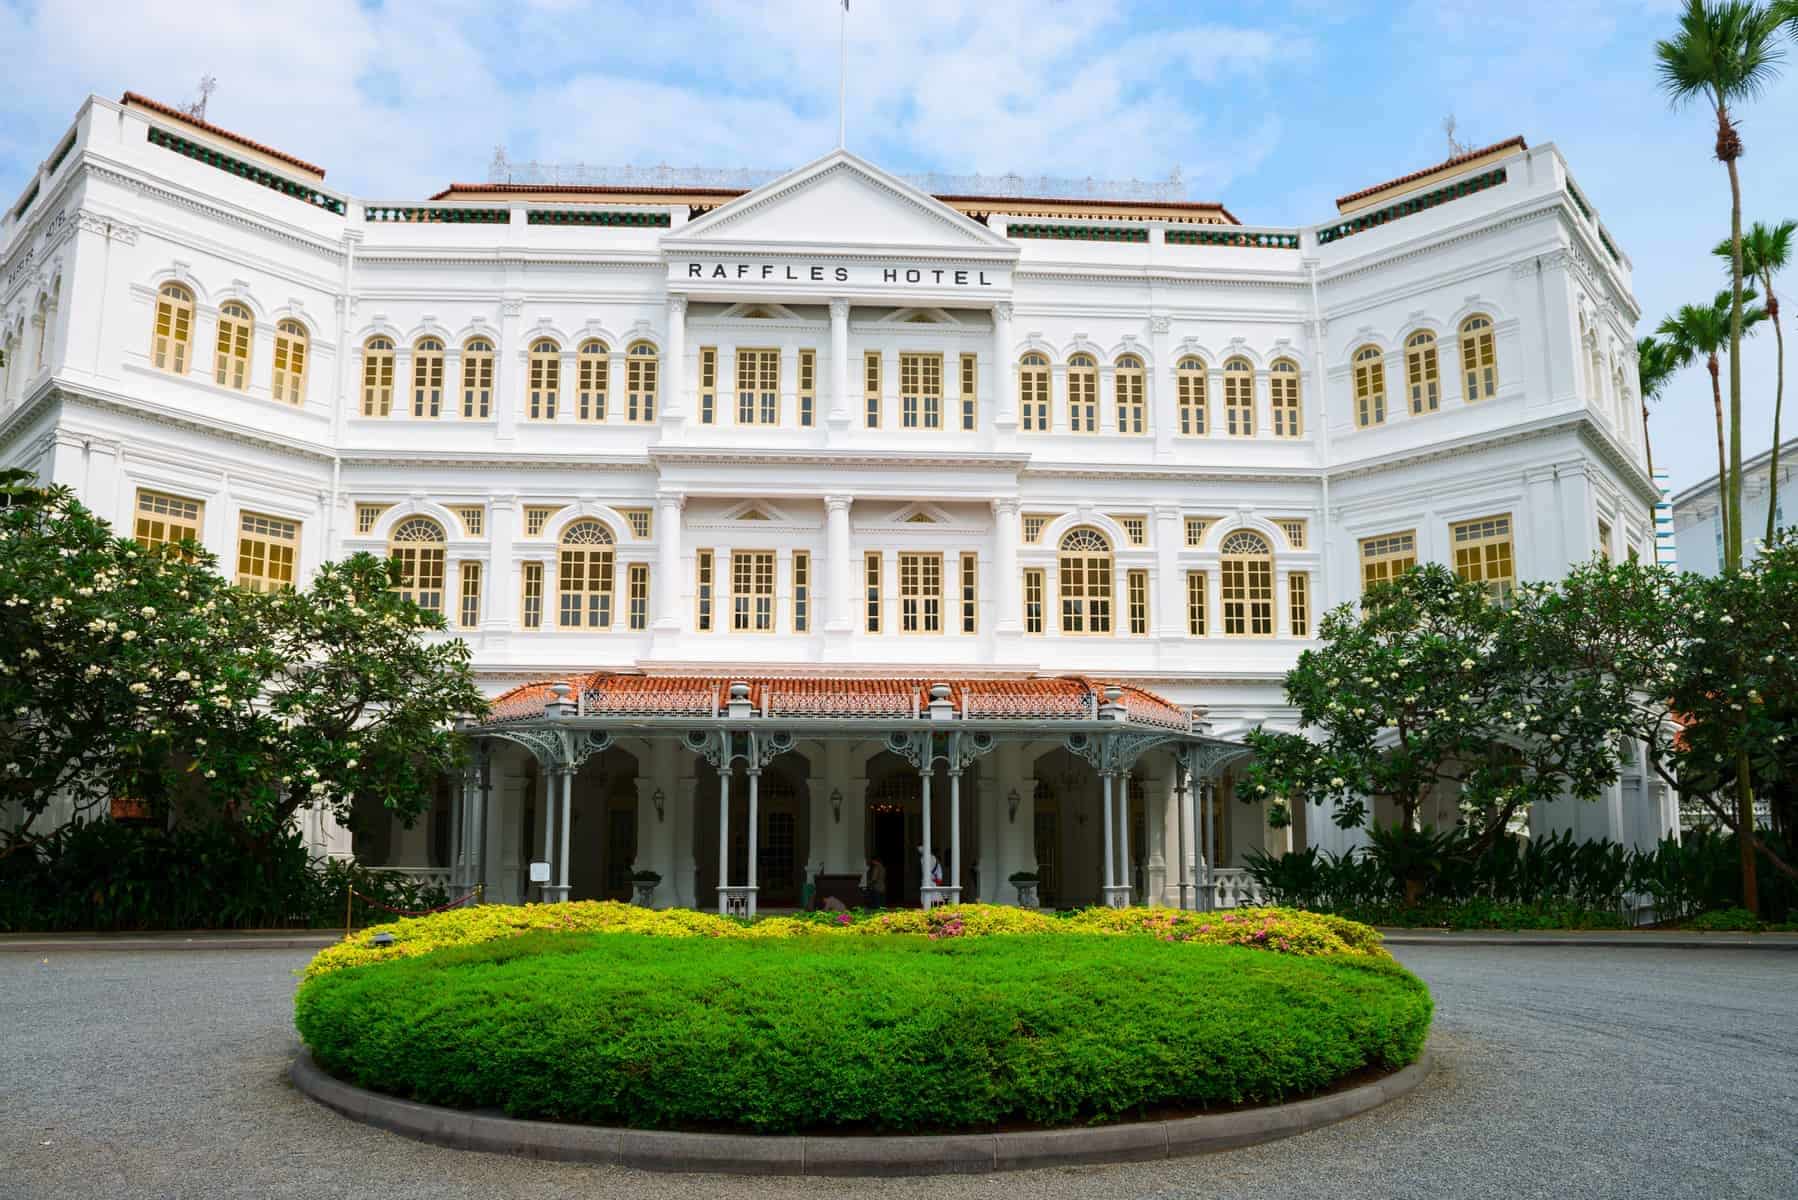 Singapore - September 08, 2012: The Raffles Hotel. Opened in 1899, it was named after Singapore's founder Sir Stamford Raffles.